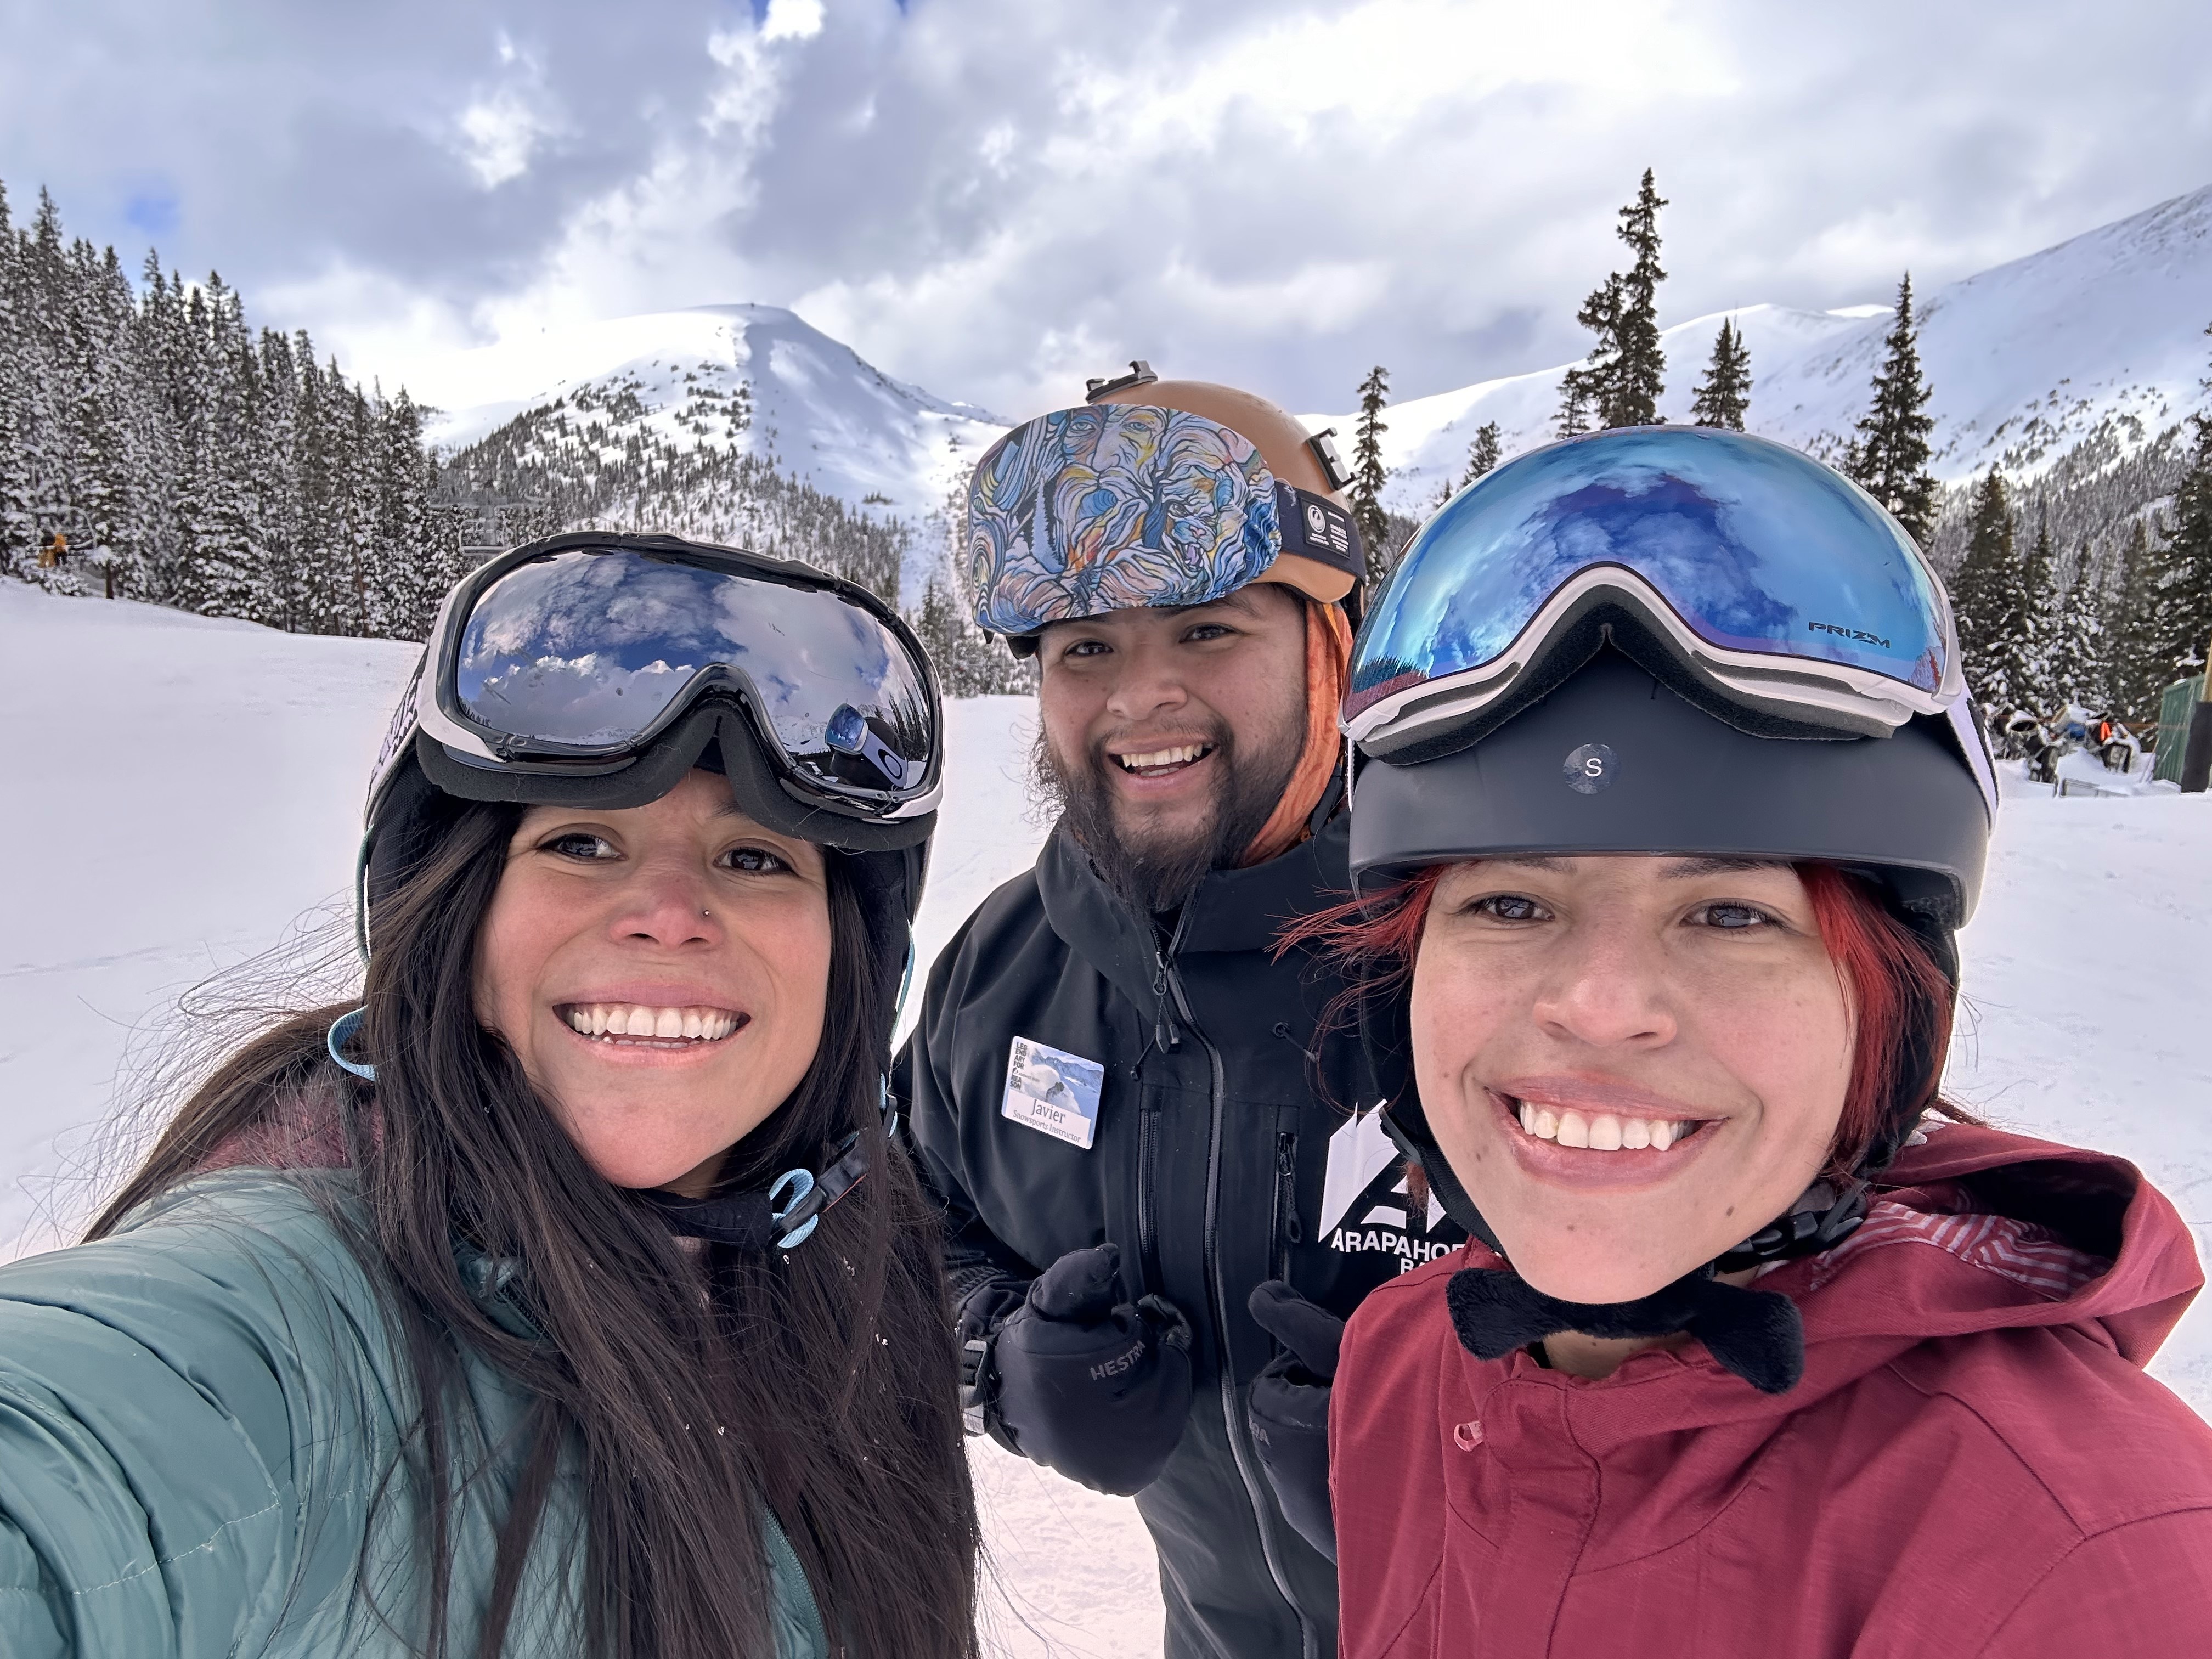 Three people wearing snow gear look into the camera and smile